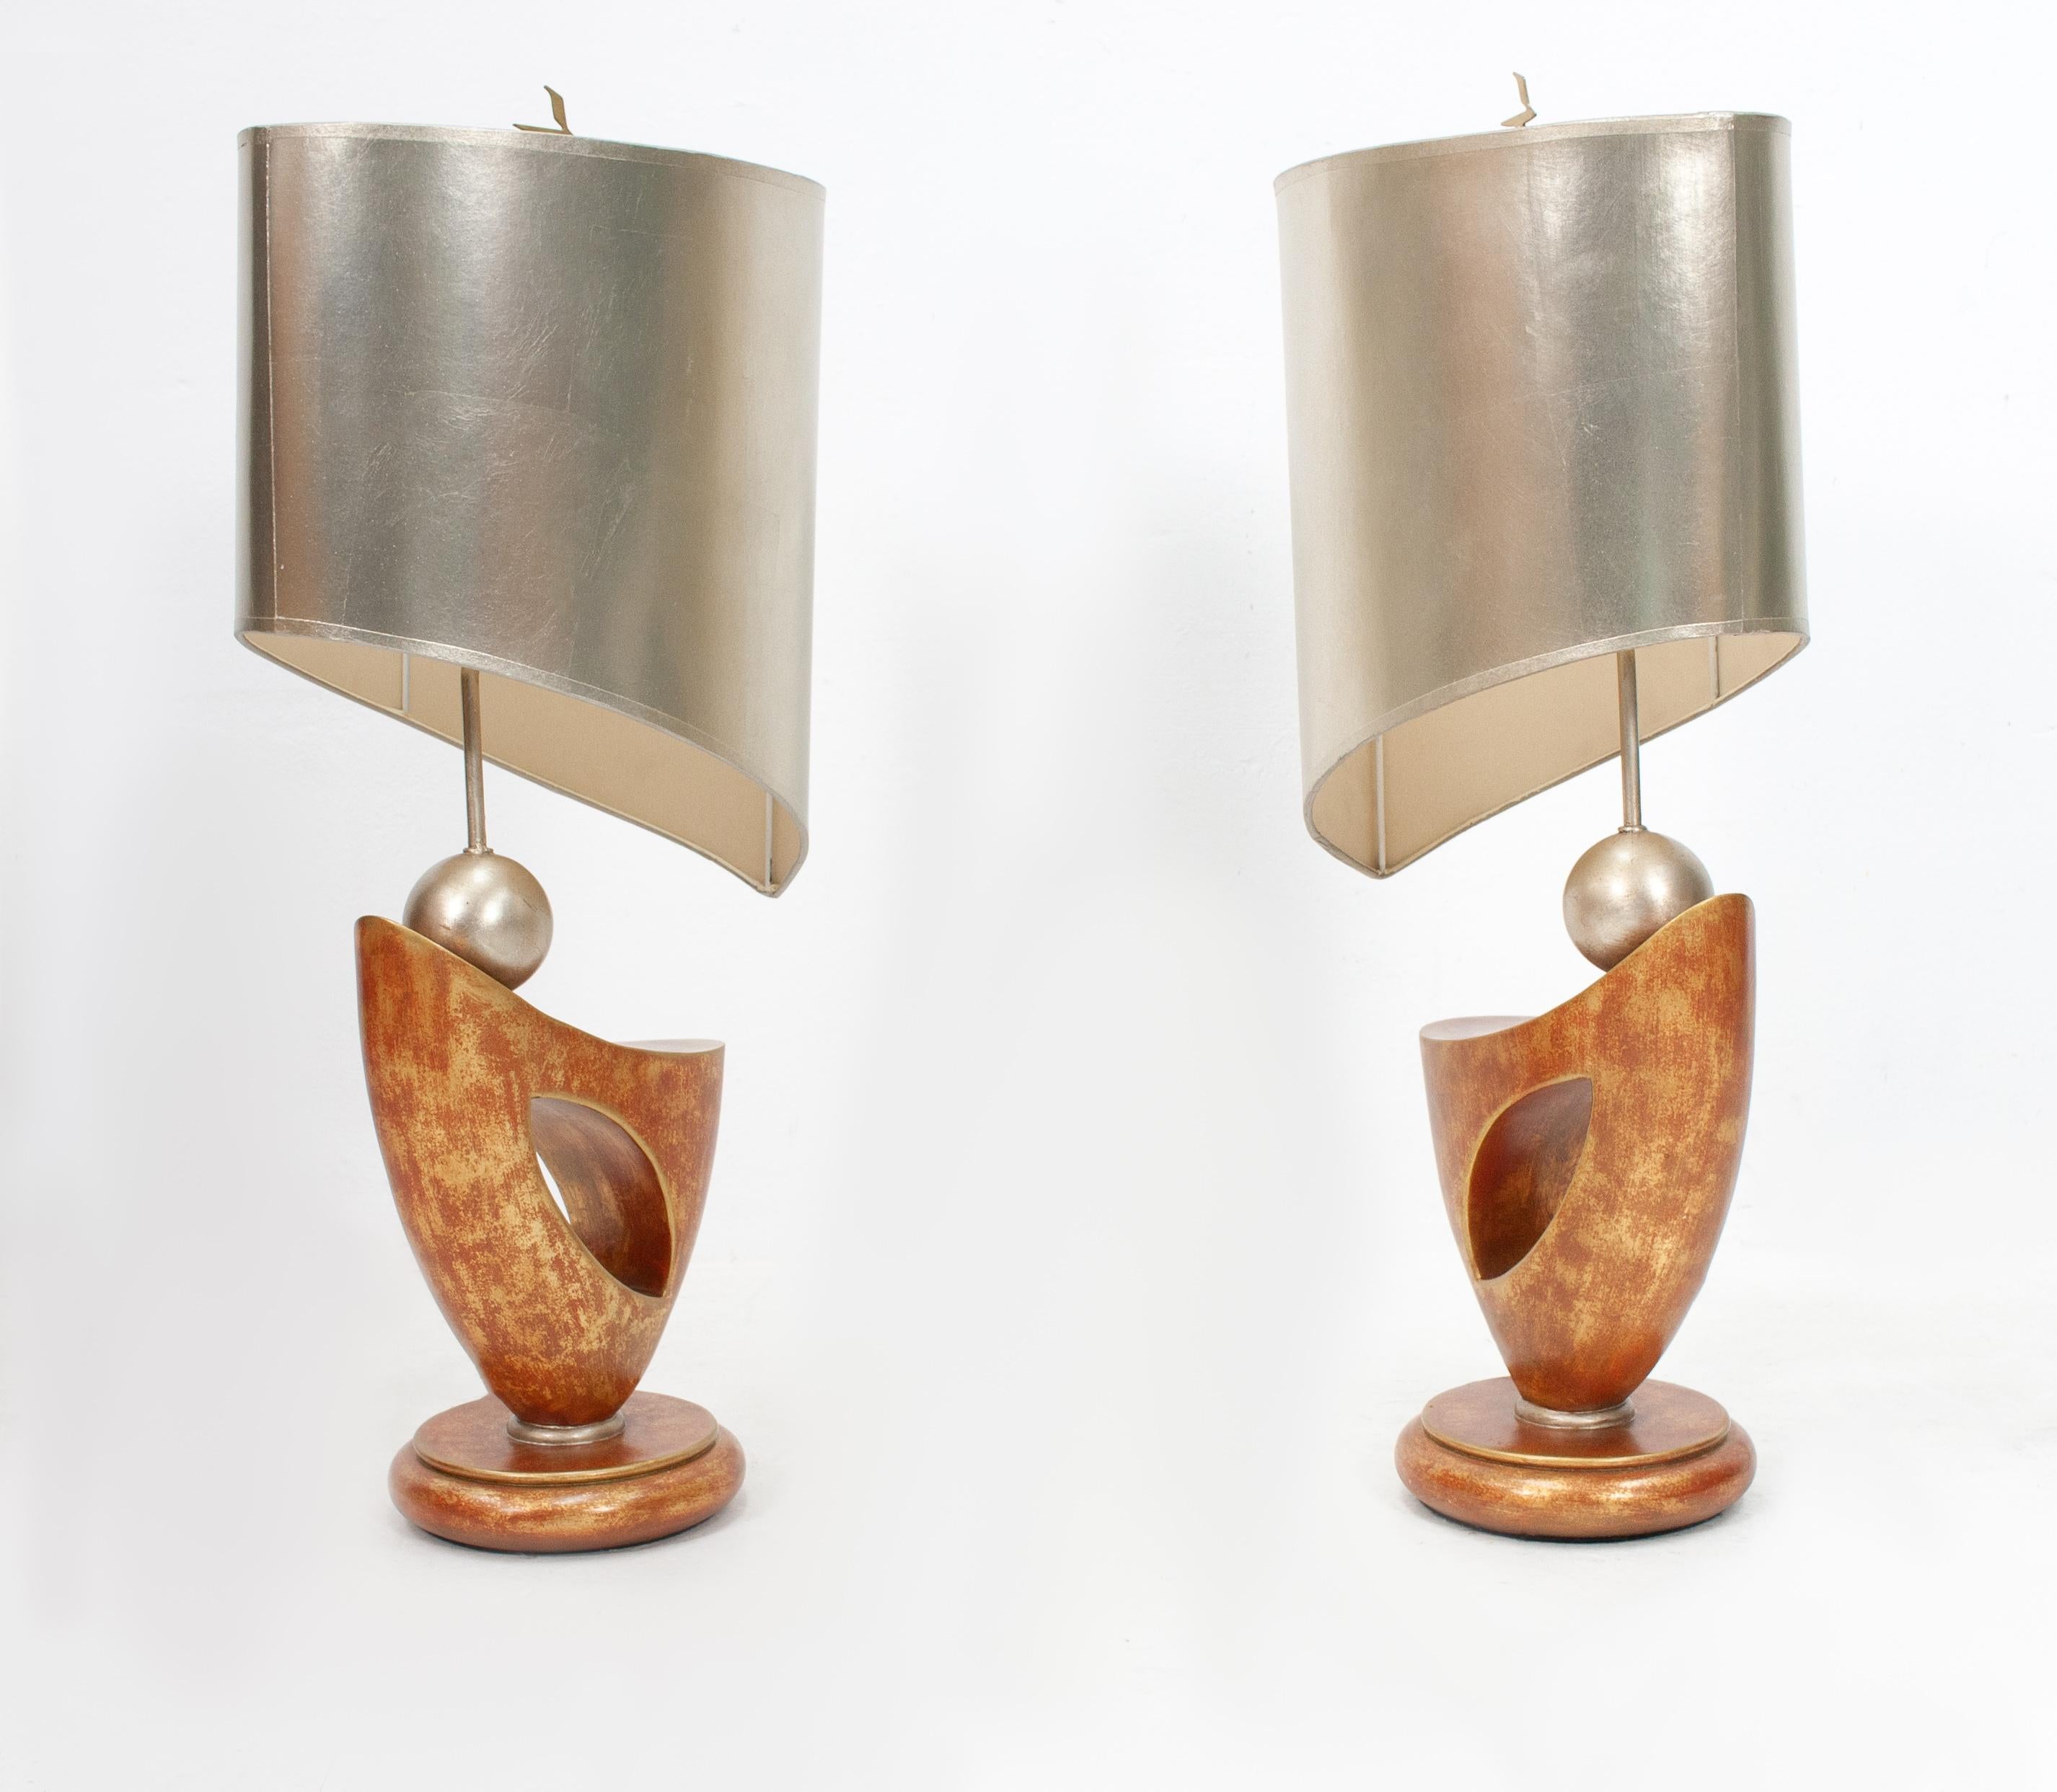 Two Leeazanne ceramic table lights with there original shades. Terracotta and silver color base. Comes with a silver color shade. Hollywood Regency in style. Manufactured and signed by Leeazanne, USA, 1980.

Measures: Height 75 cm, width 37 cm,